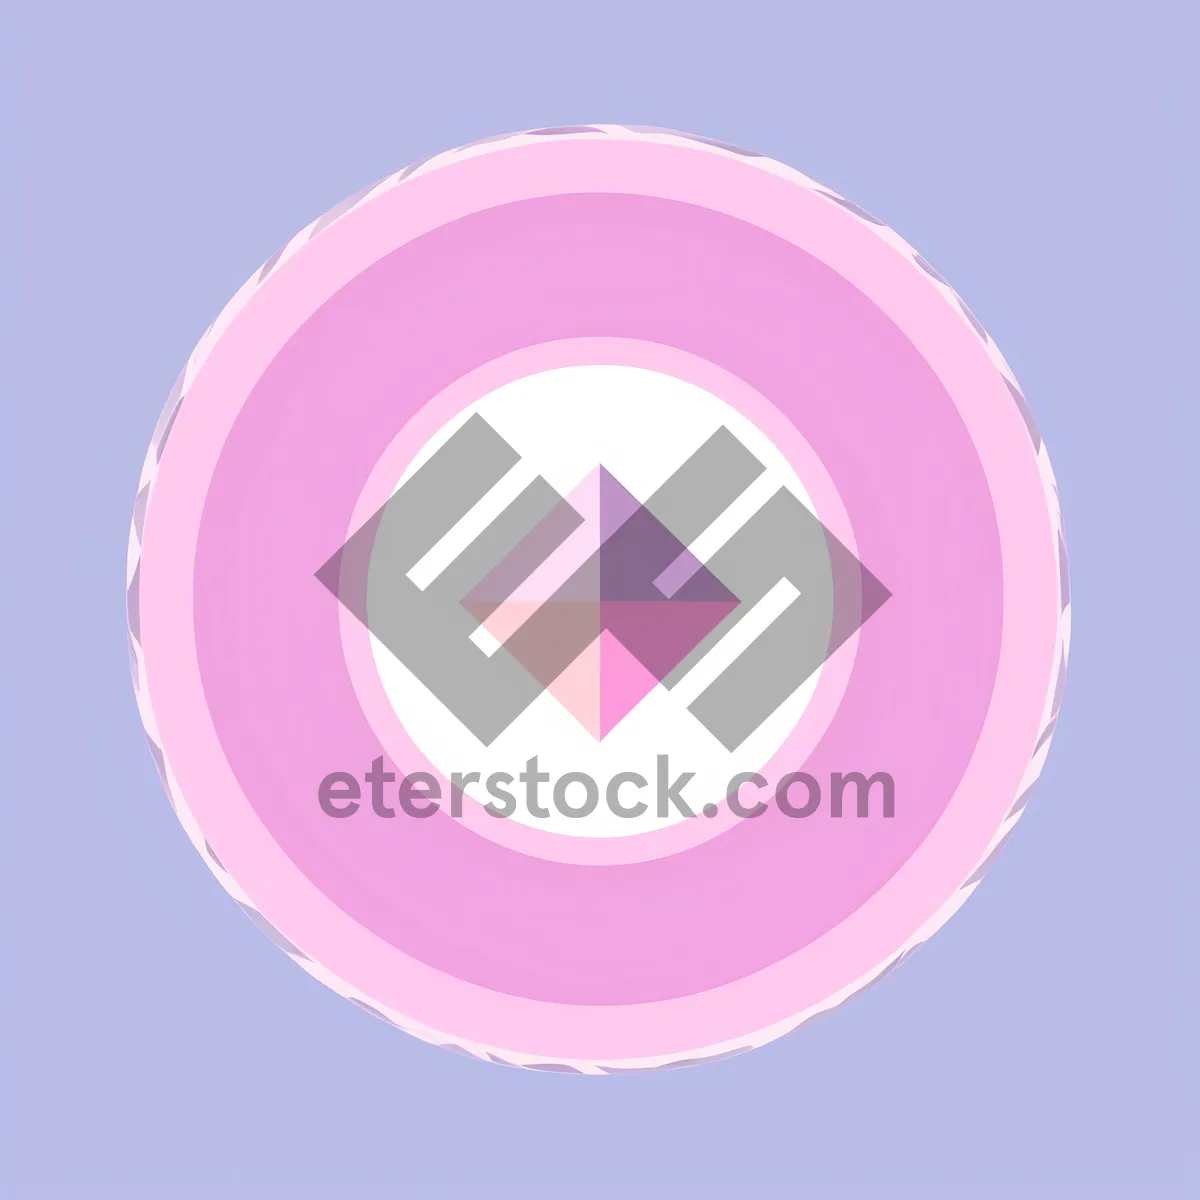 Picture of Glossy Web Button Icons: Set of Shiny Circular Symbols